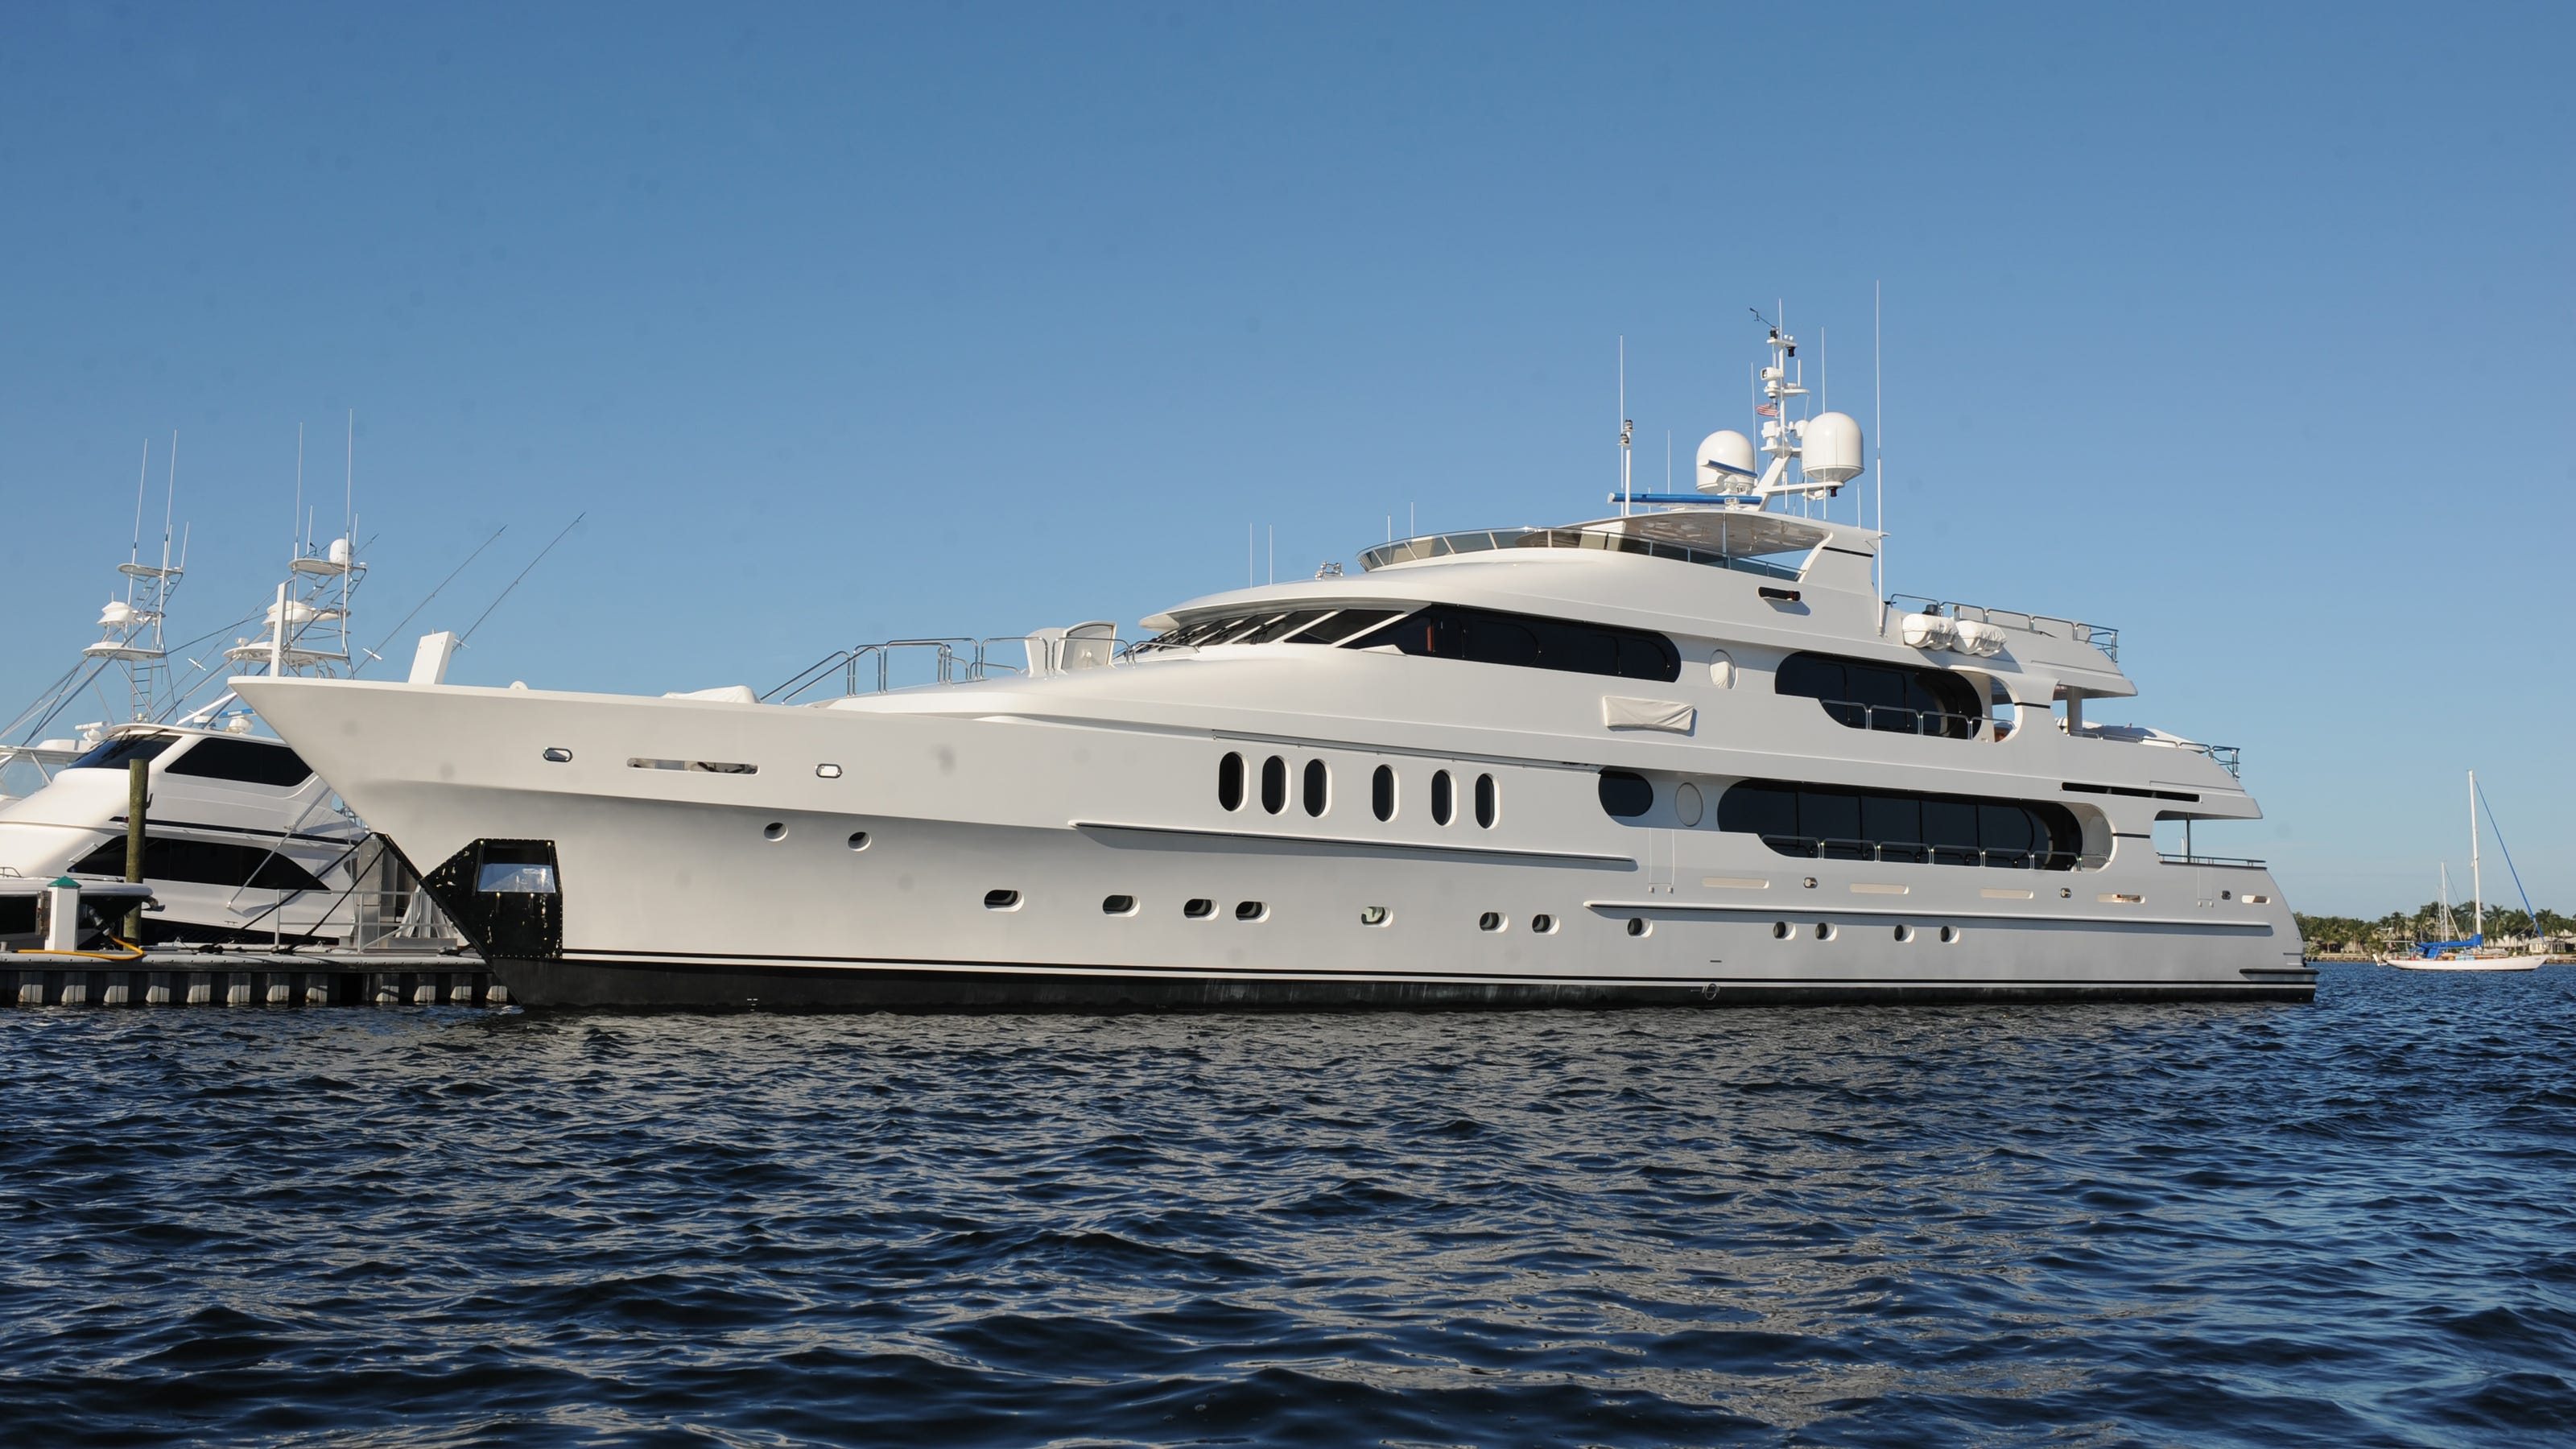 Tiger Woods Luxury Yacht Privacy Smaller Than Others At Bahamas Dock